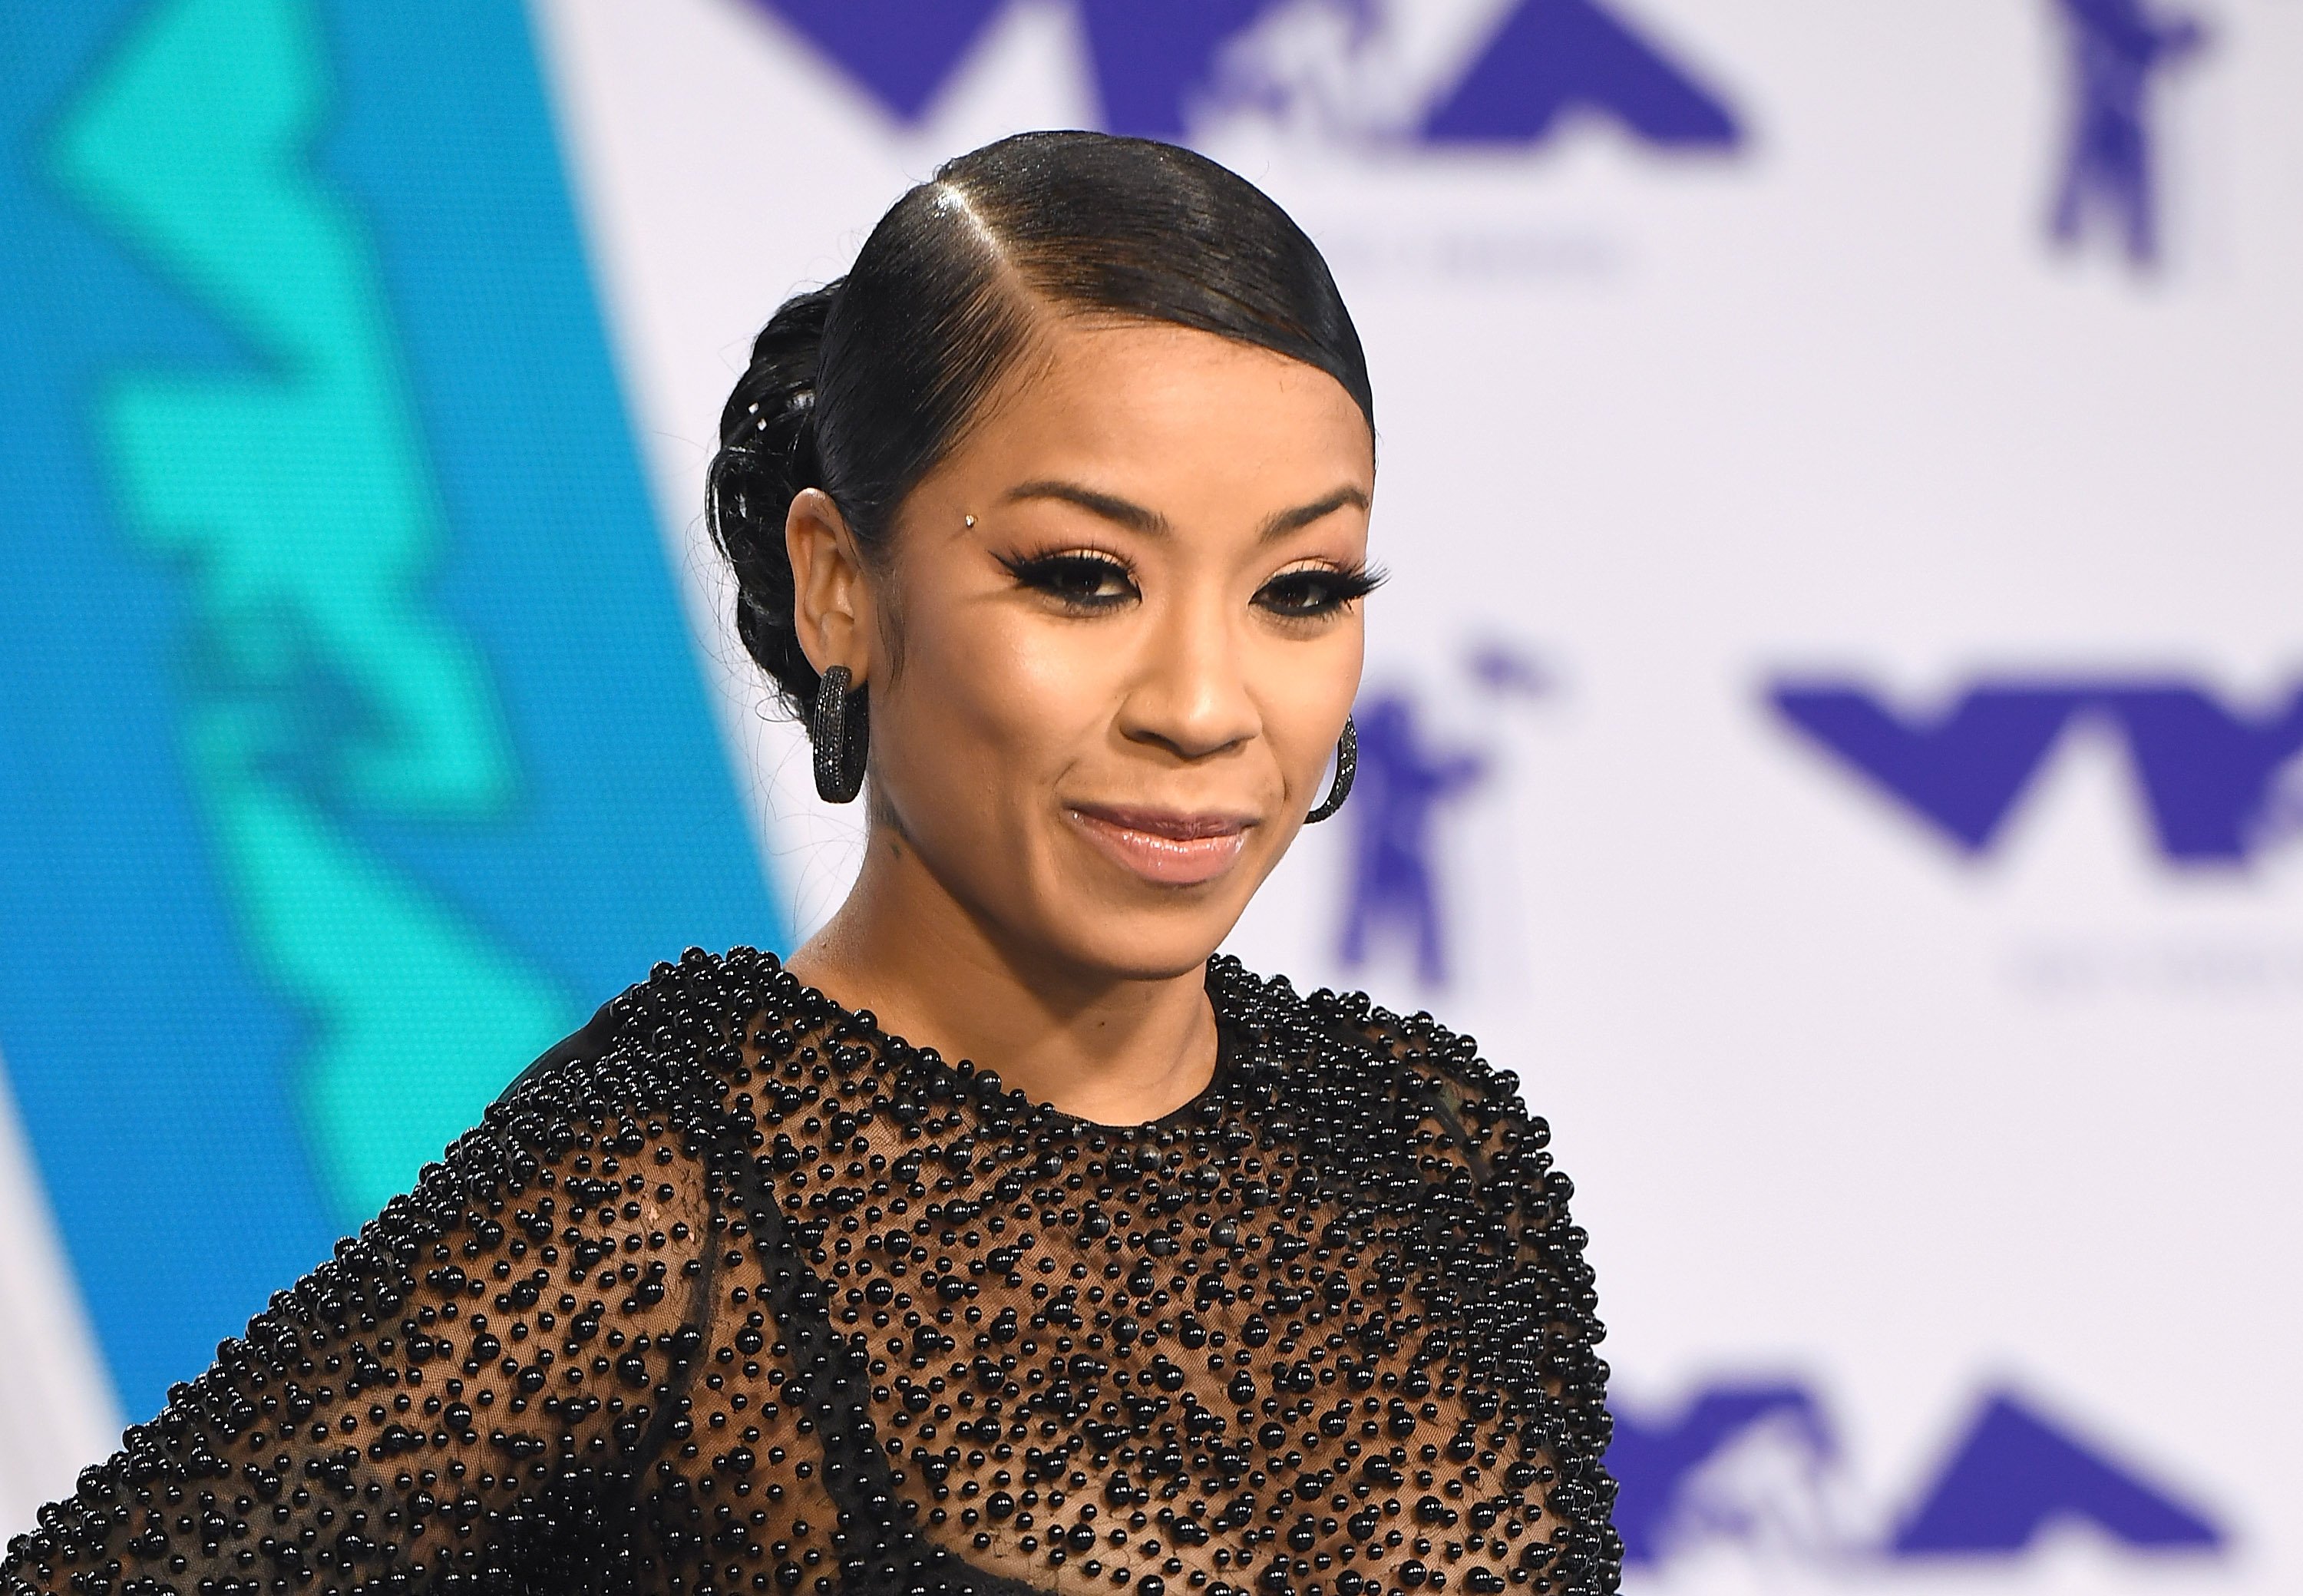 Keyshia Cole at the 2017 MTV VMAs at The Forum on August 27, 2017 in Inglewood, California. | Source: Getty Images